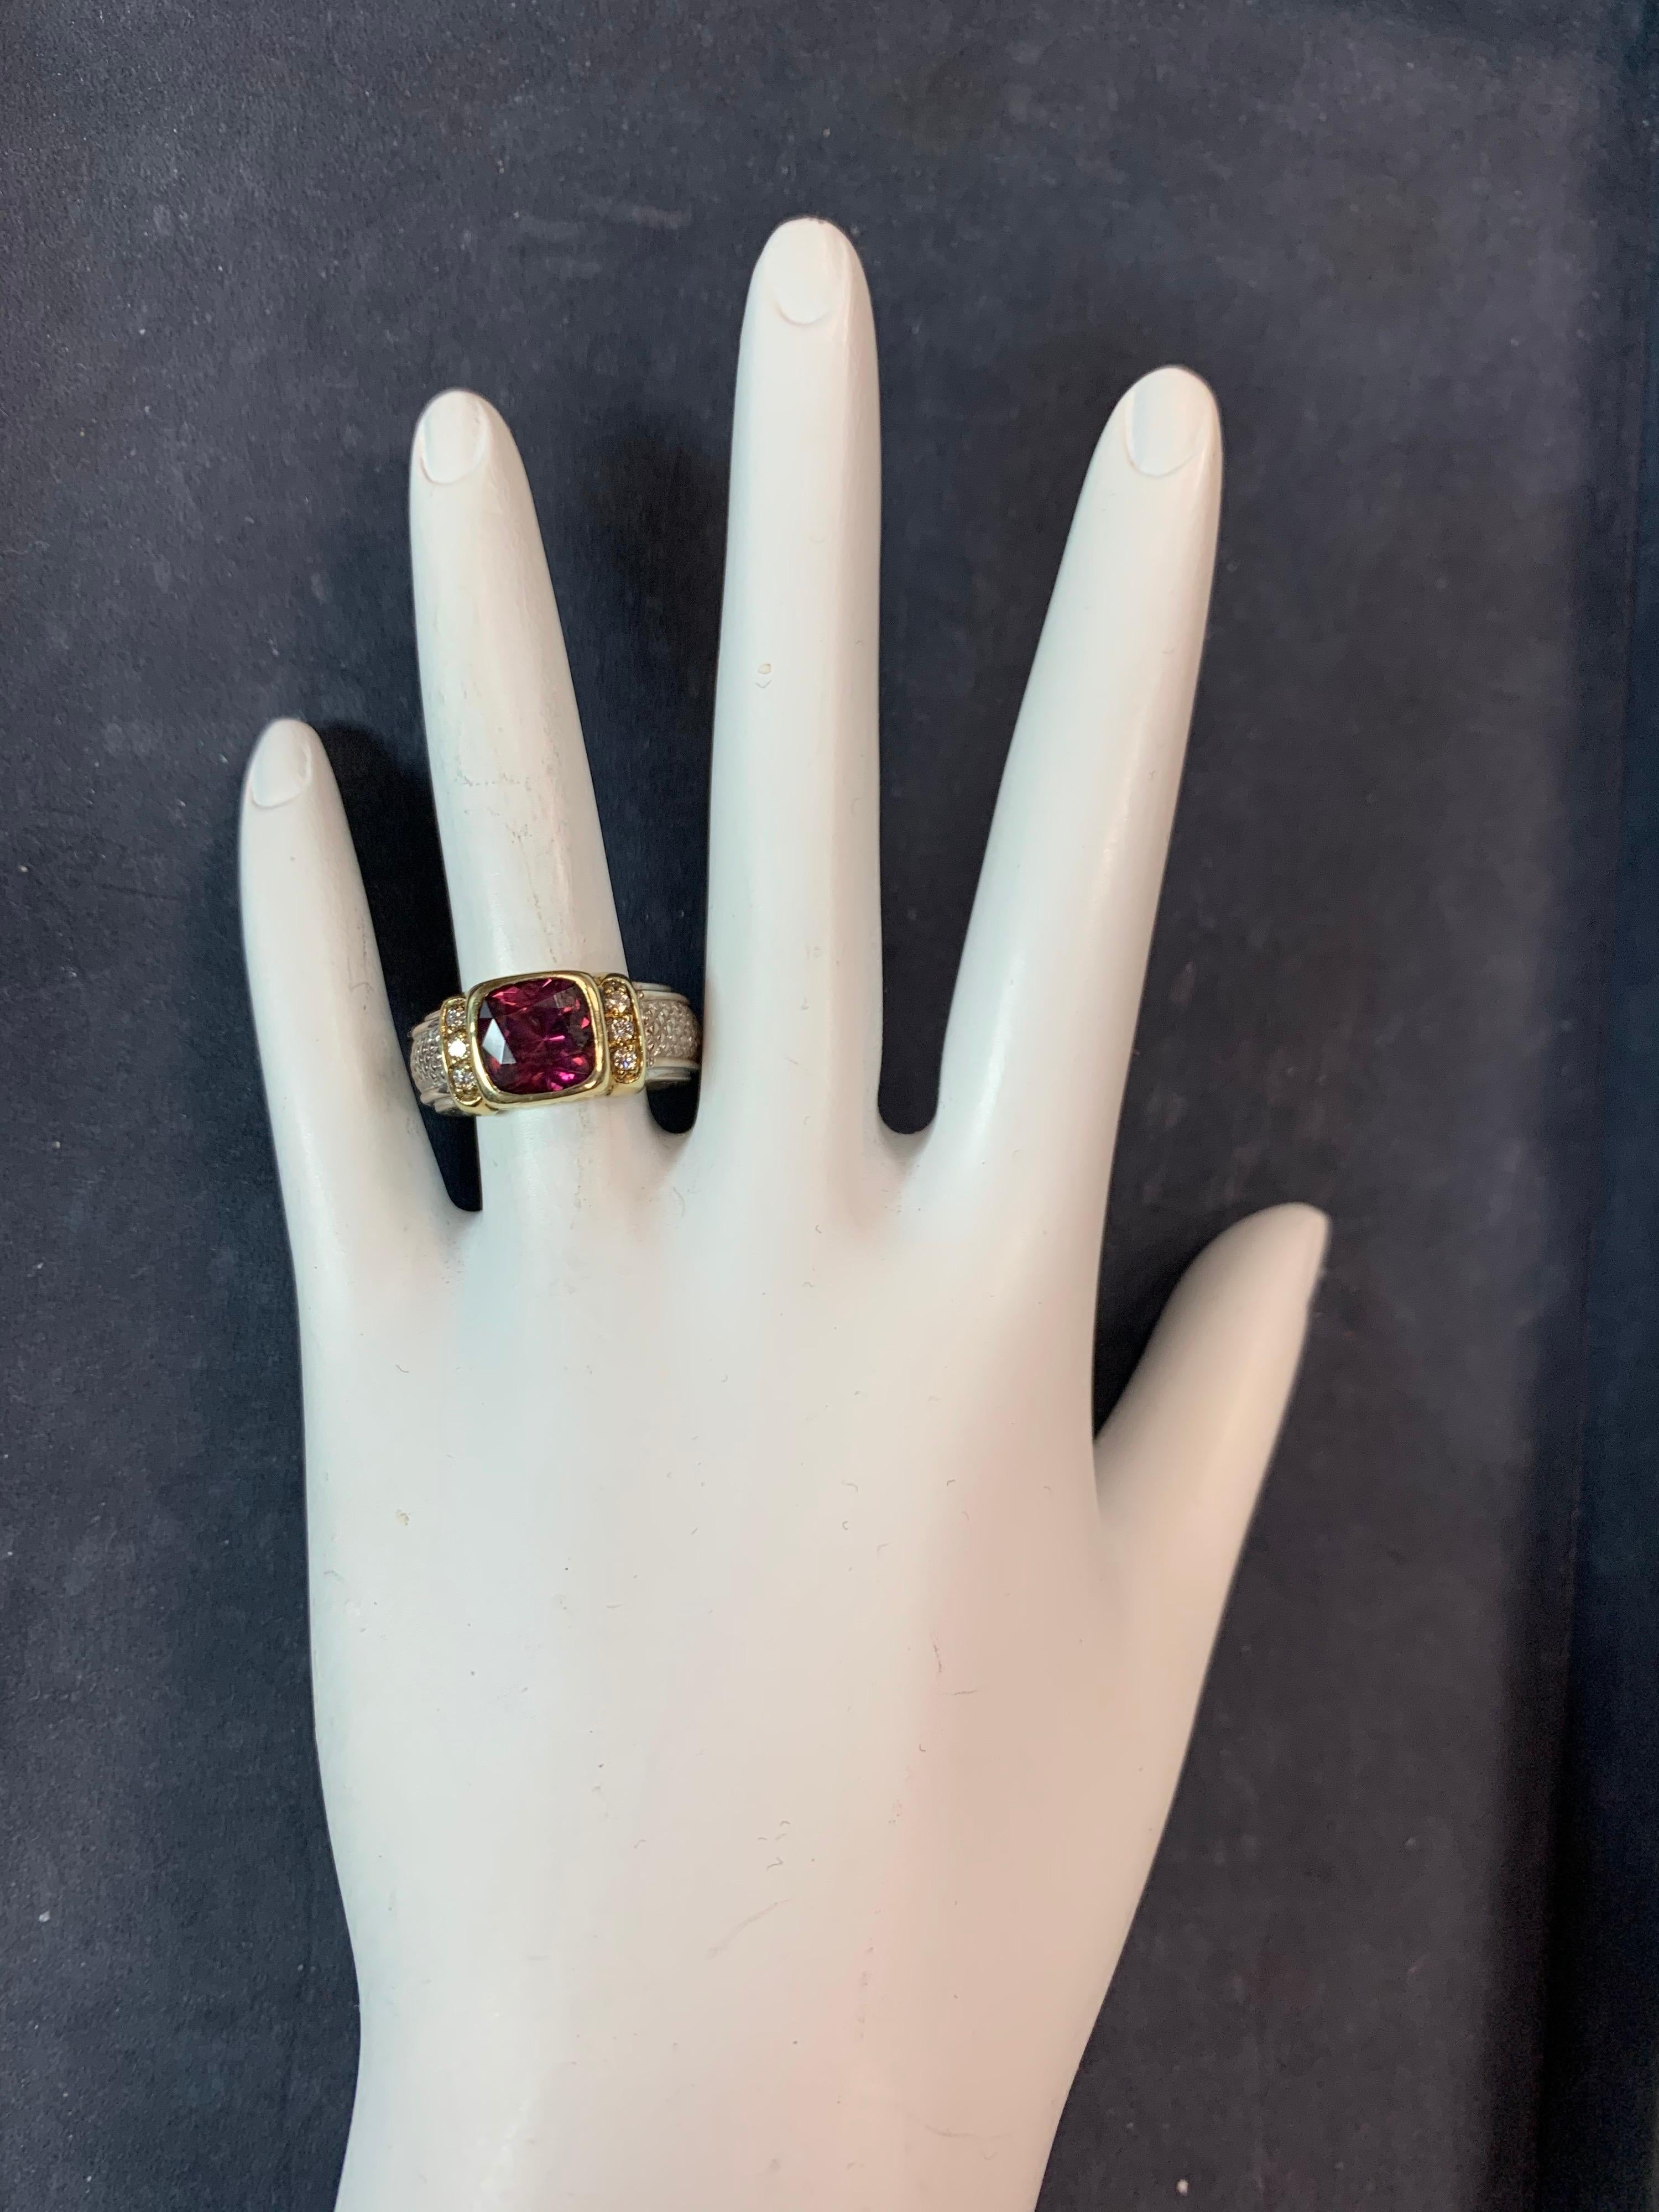 Stunning Ladies 925 Silver and 18k Gold Cocktail Judith Ripka Ring (size 6-). Stamped 